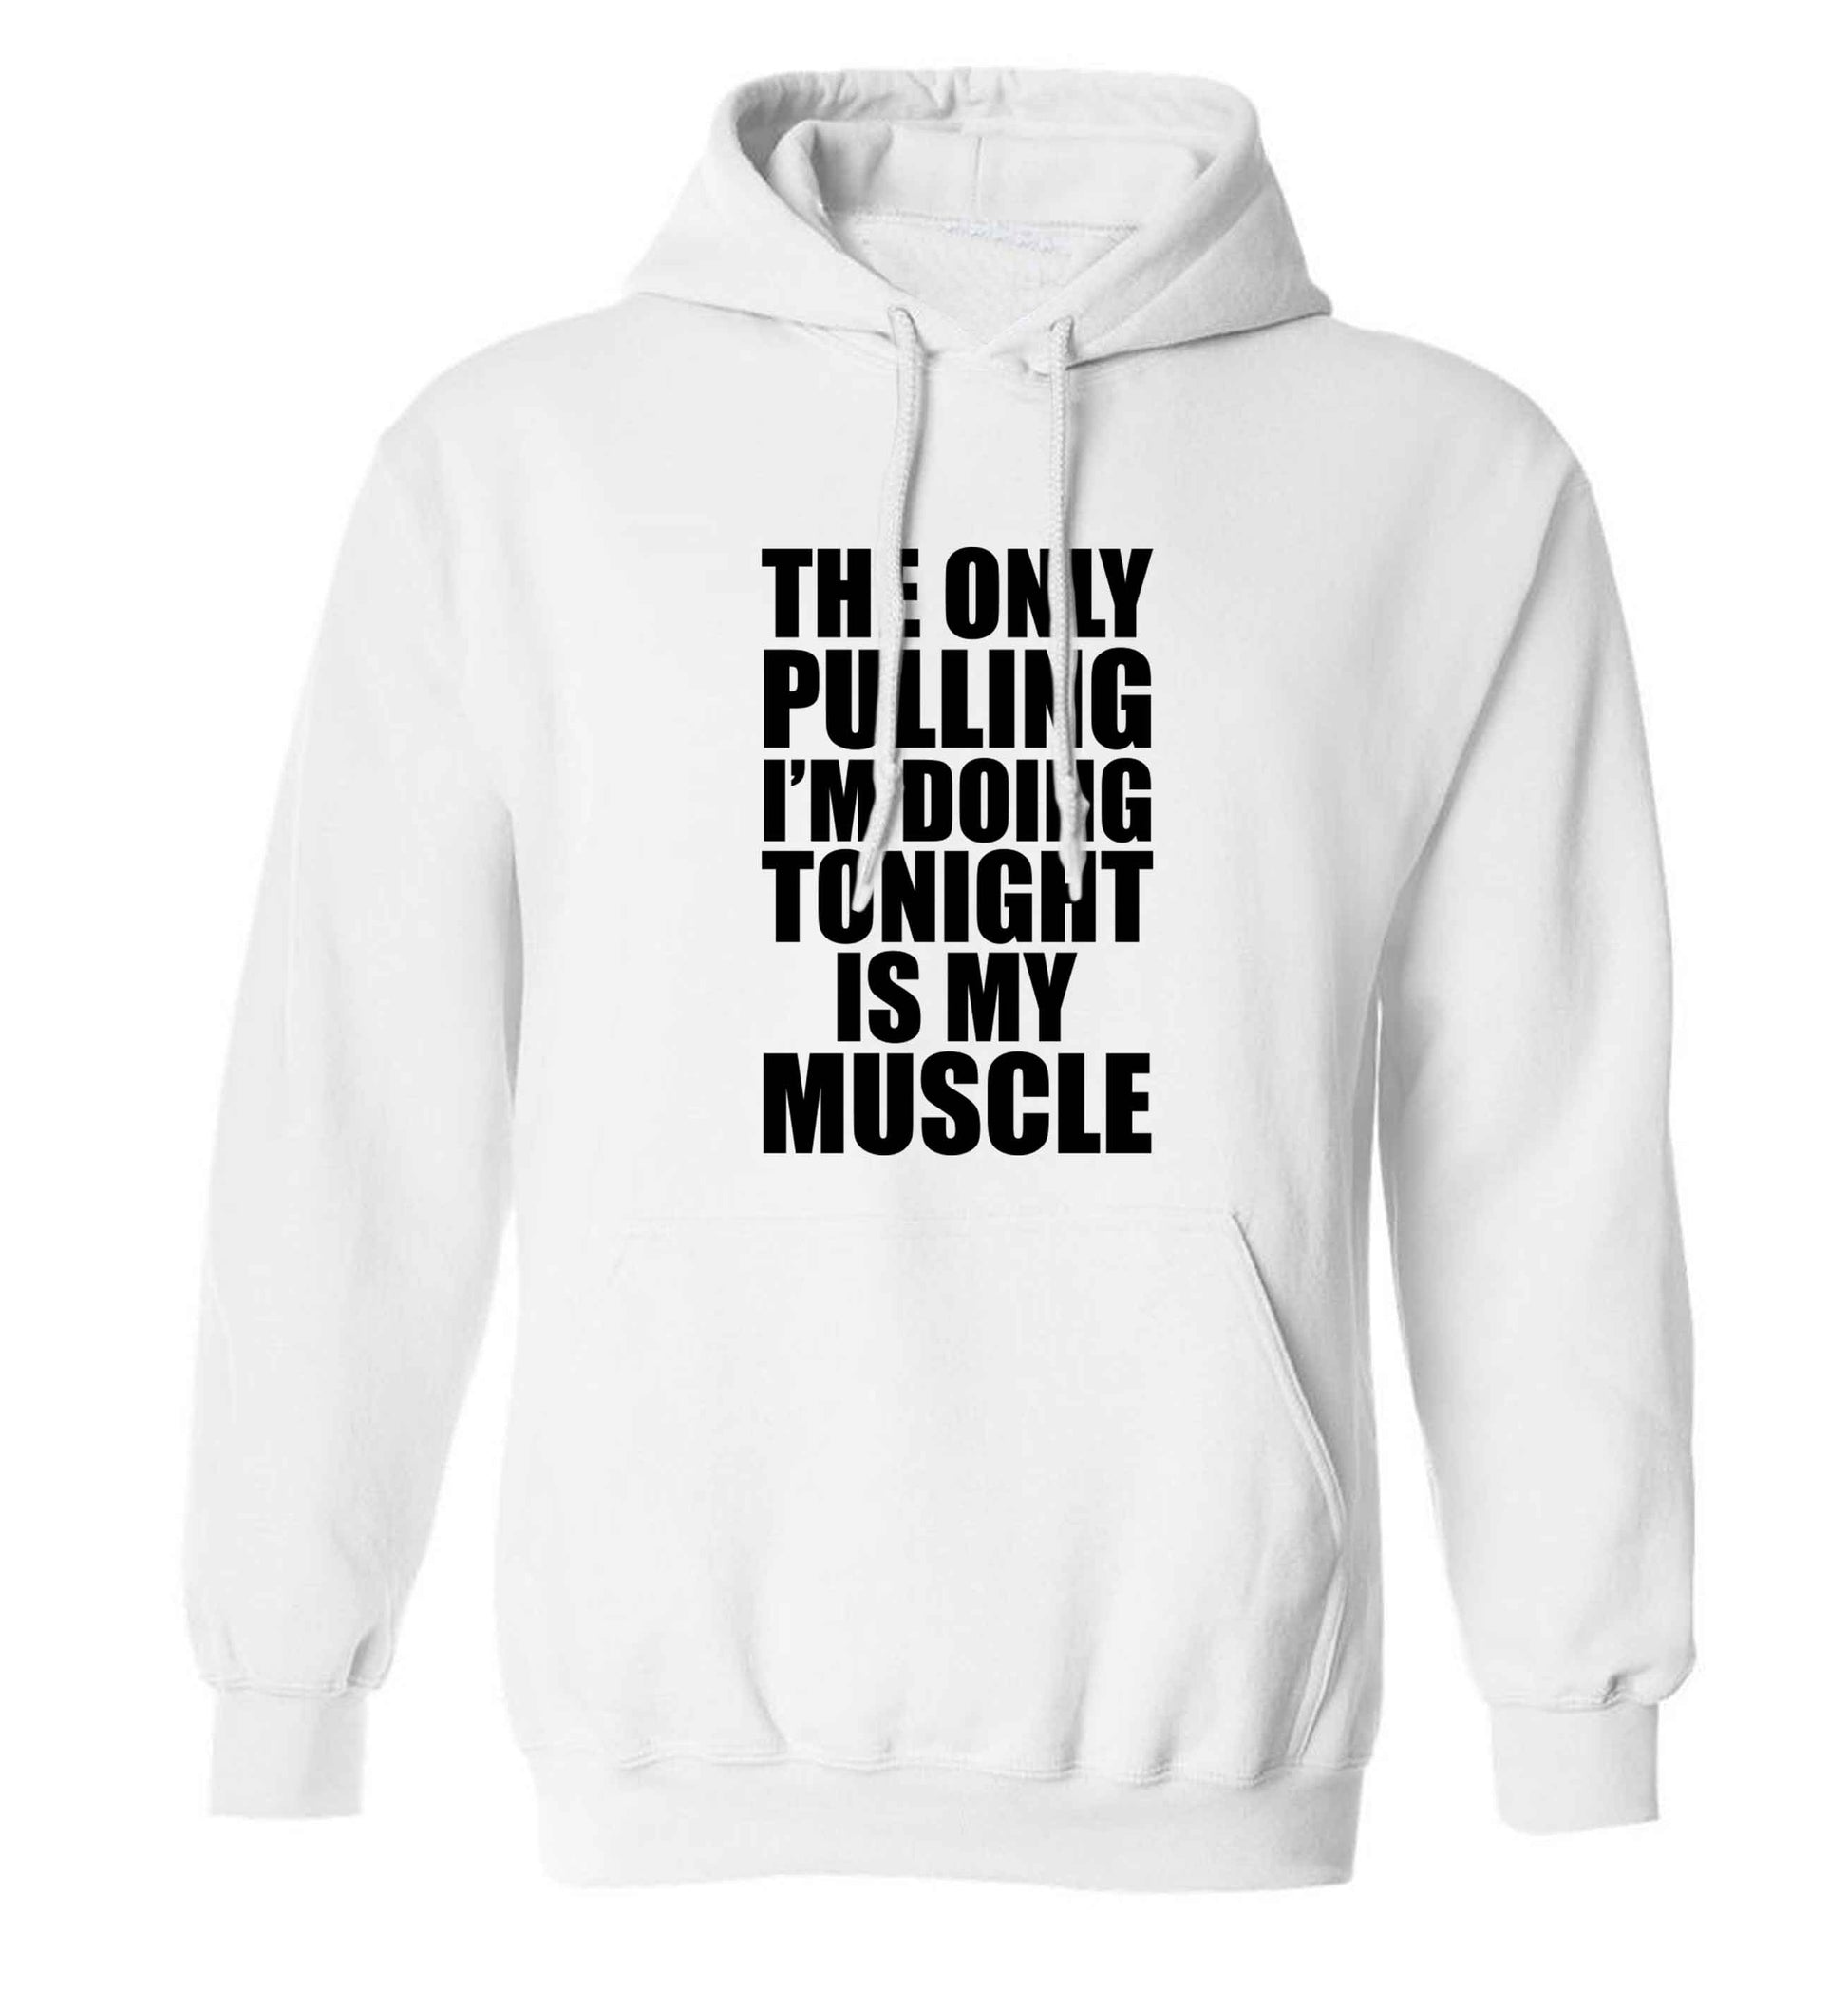 The only pulling I'm doing tonight is my muscle adults unisex white hoodie 2XL